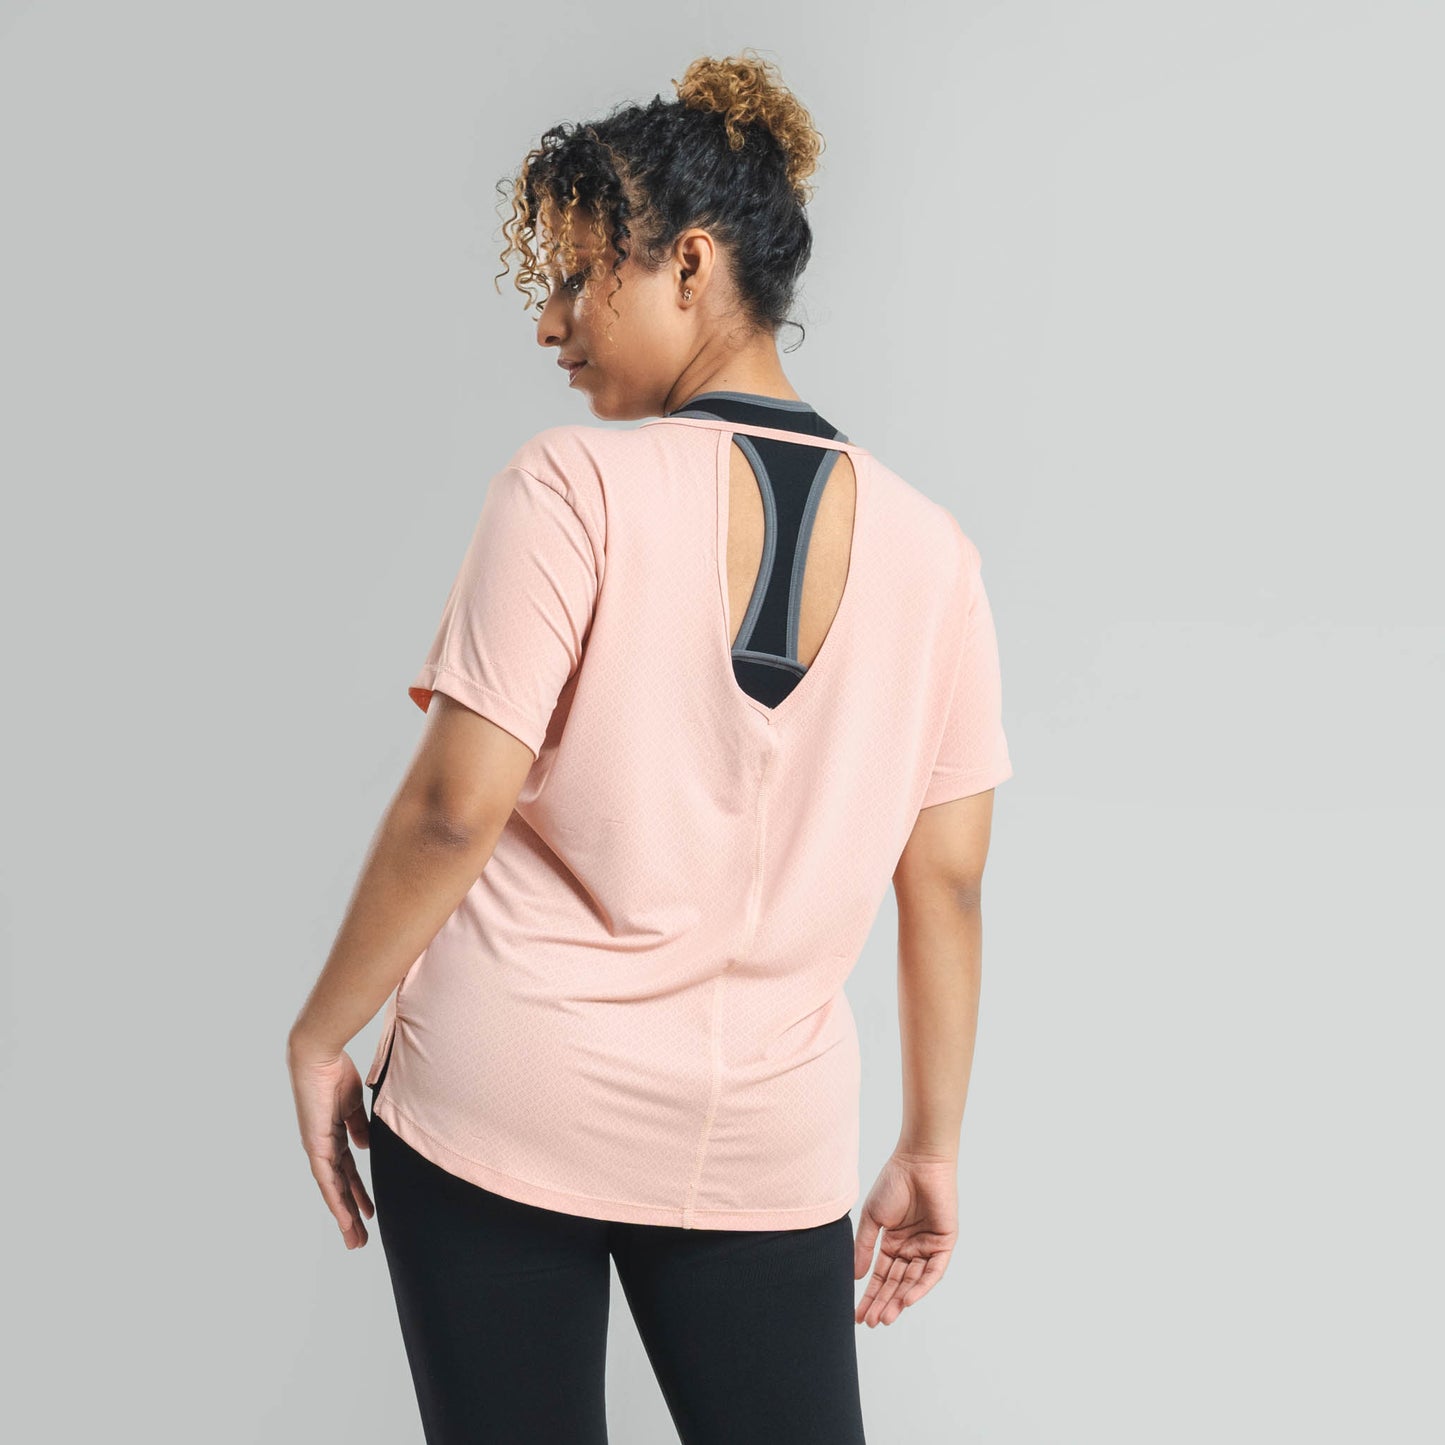 Open Back Yoga Top for Ladies